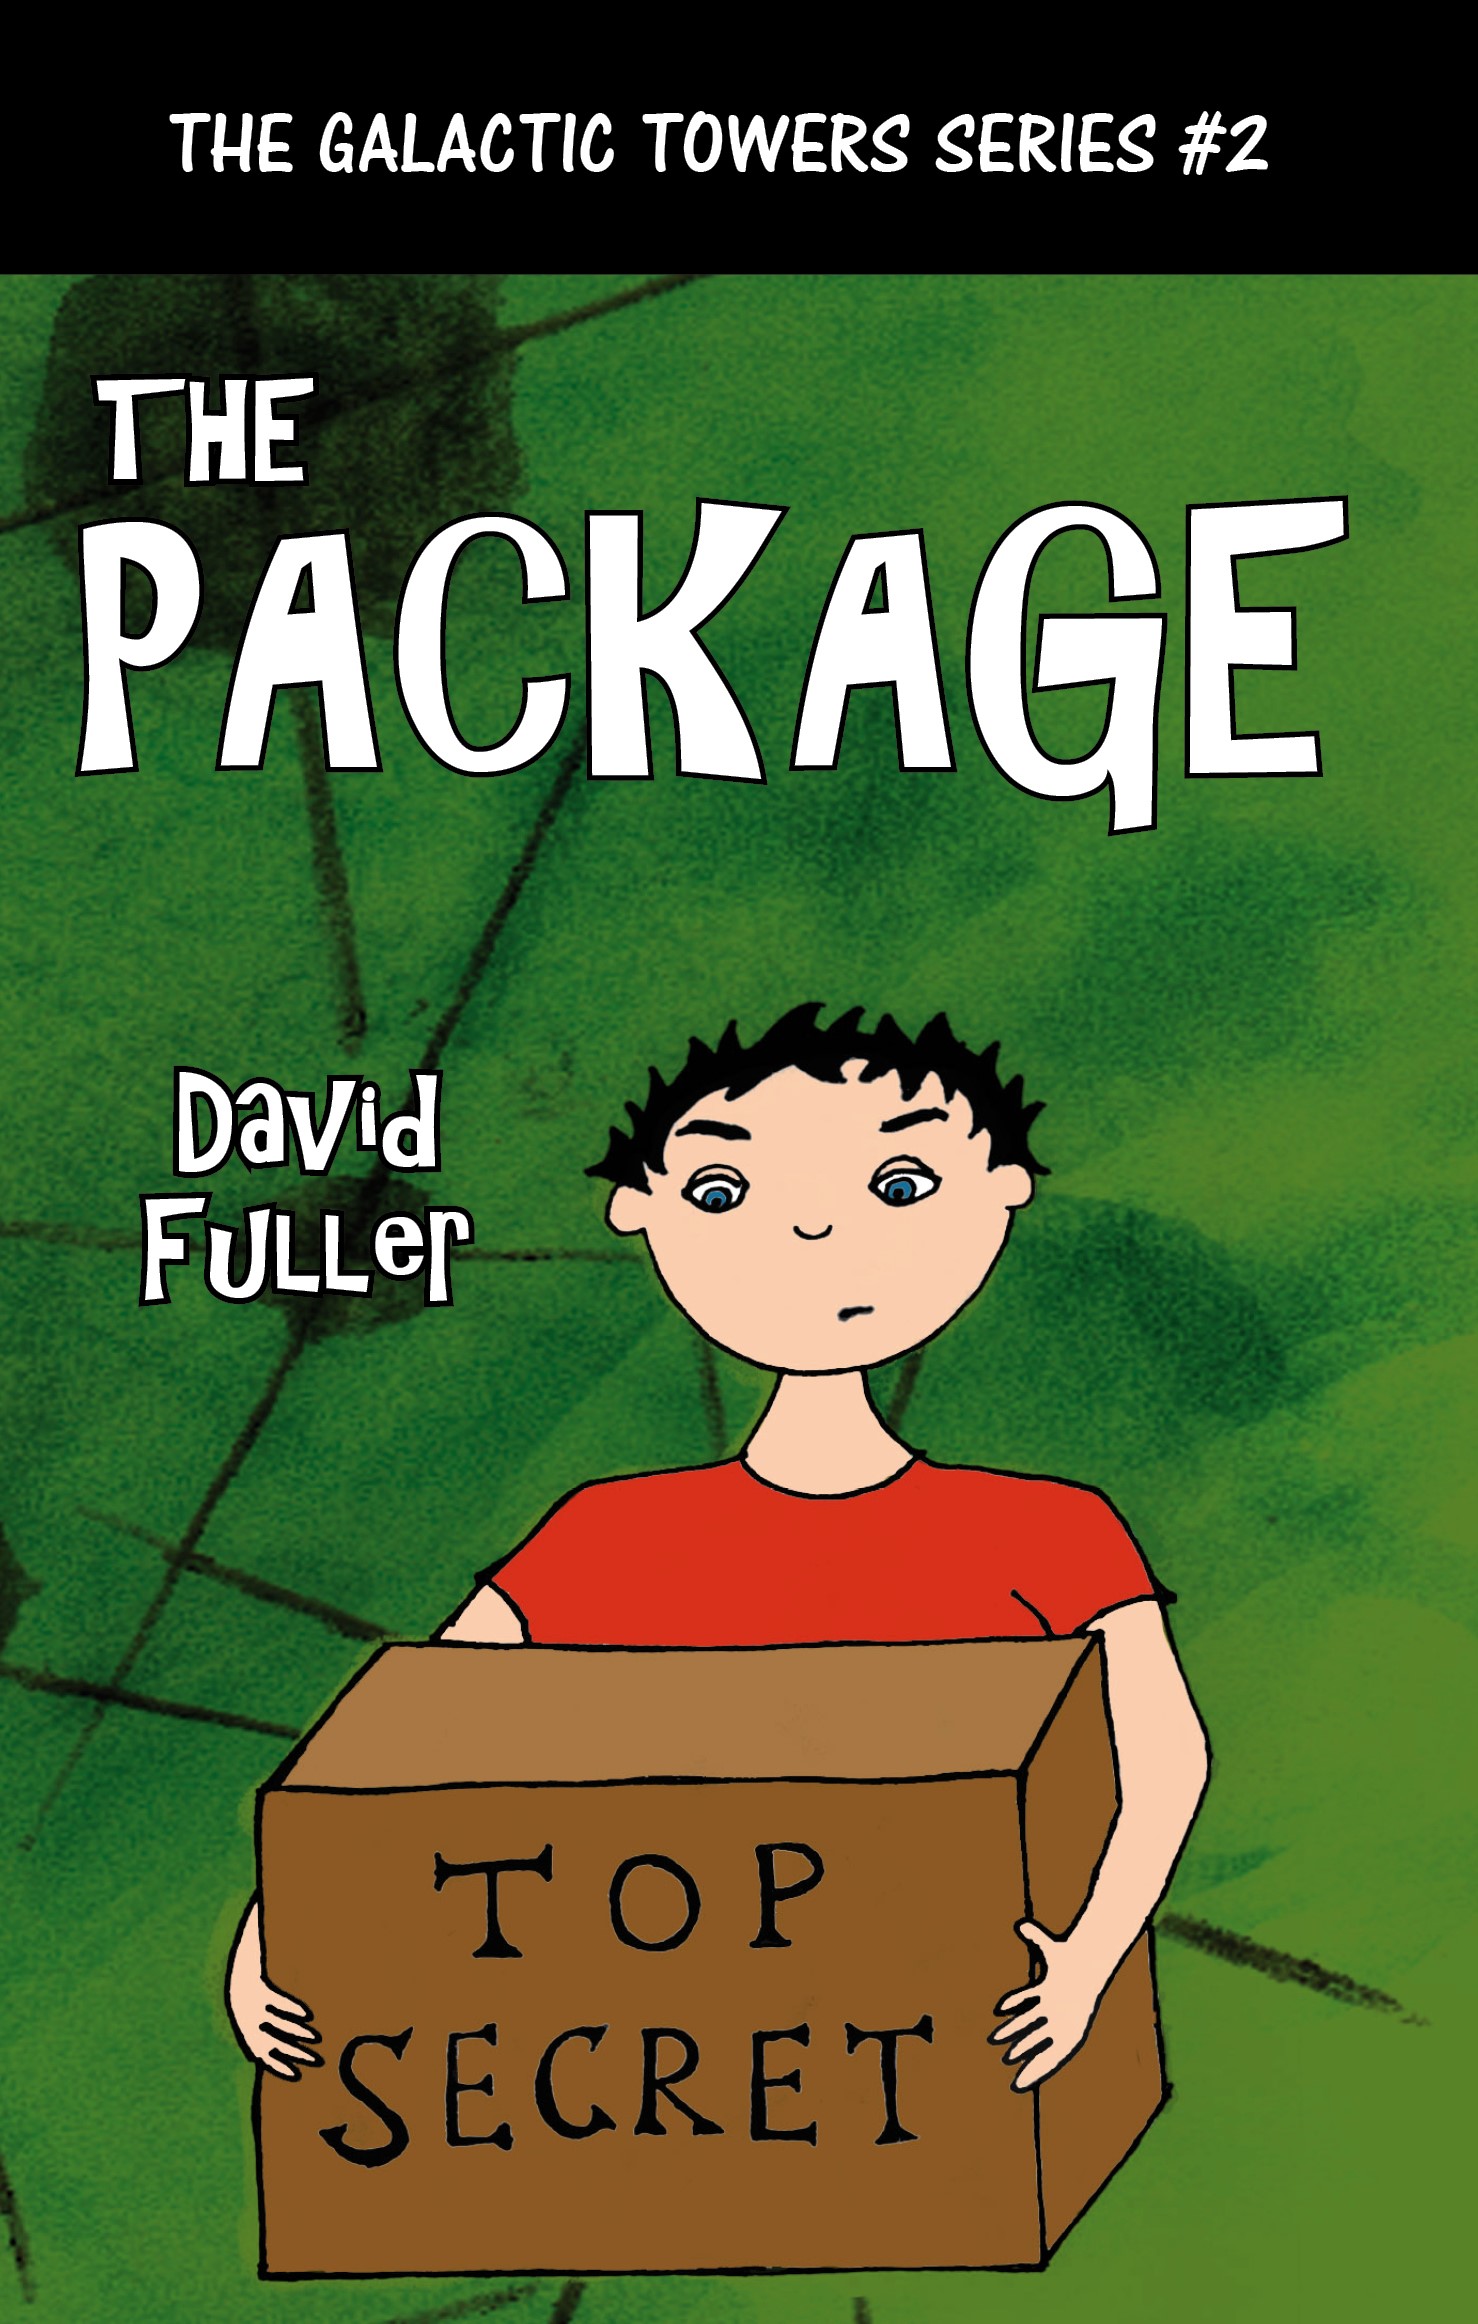 The Package: The Galactic Towers Series